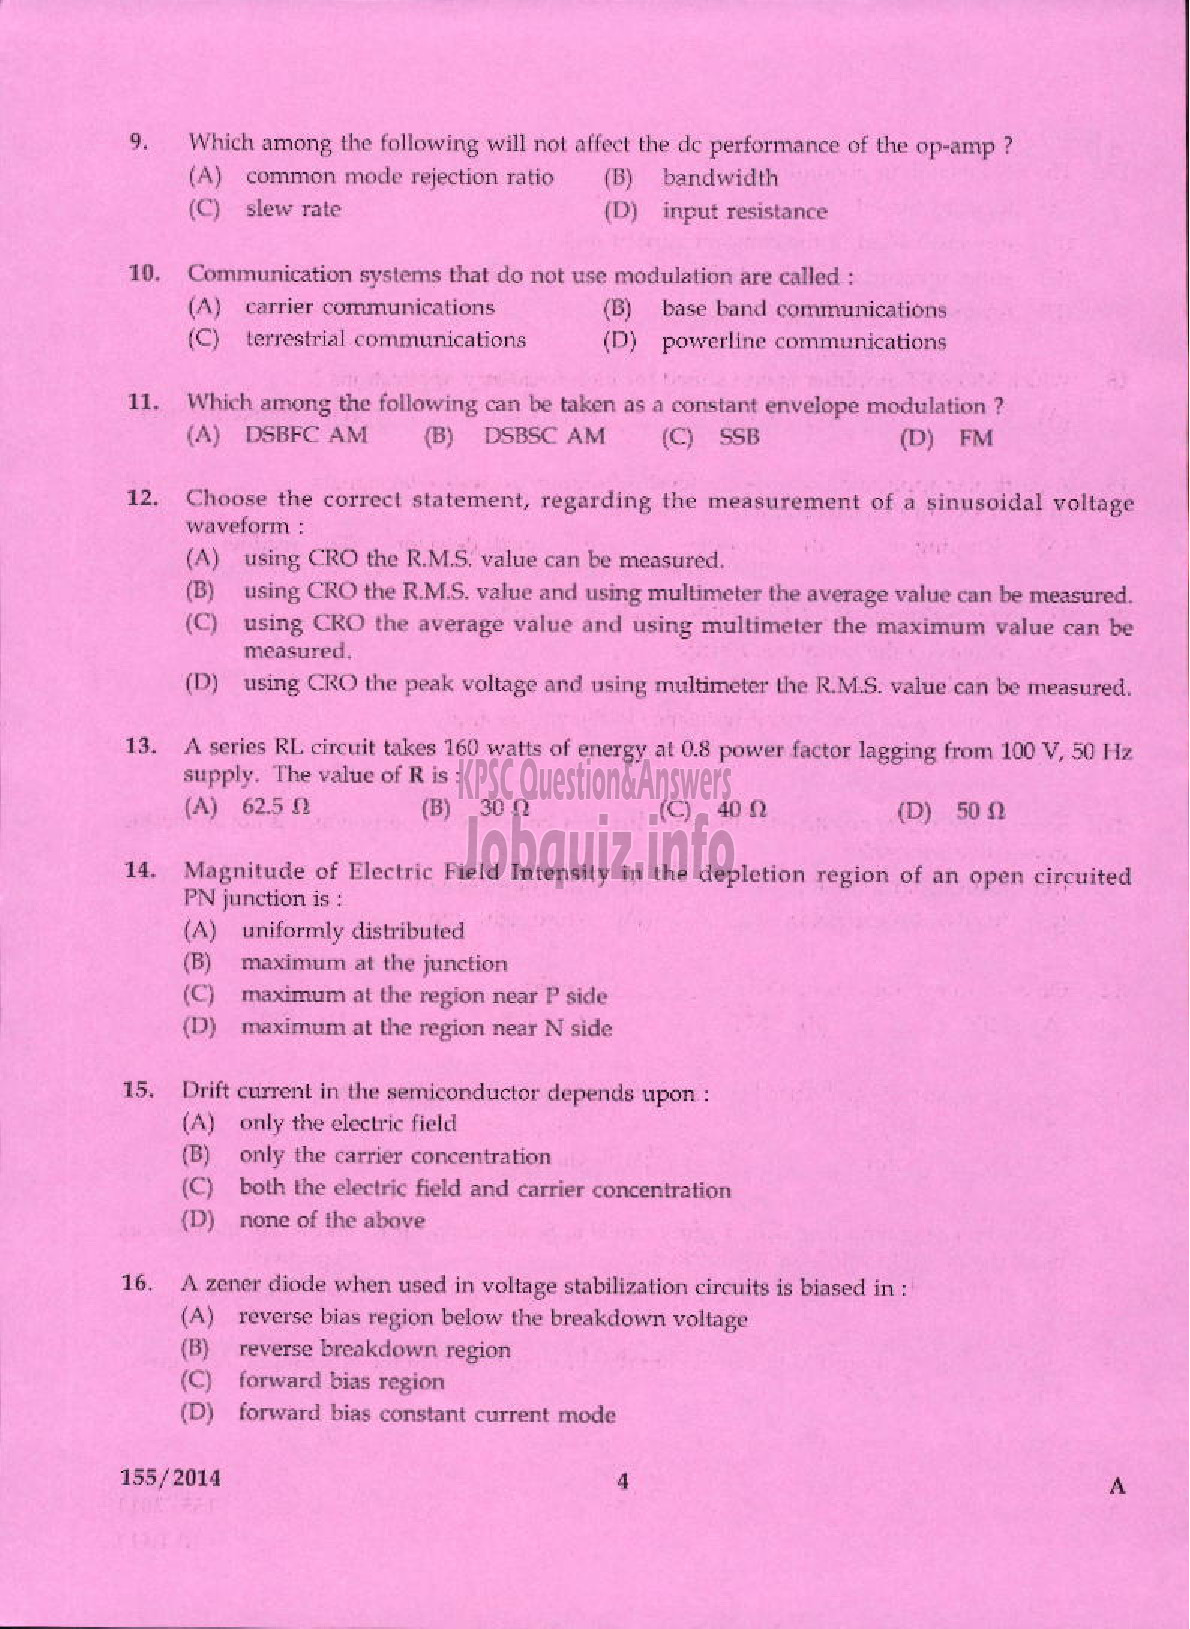 Kerala PSC Question Paper - INSTRUCTOR GR I ELECTRONICS ENGINEERING COLLEGES TECHNICAL EDUCATION-2